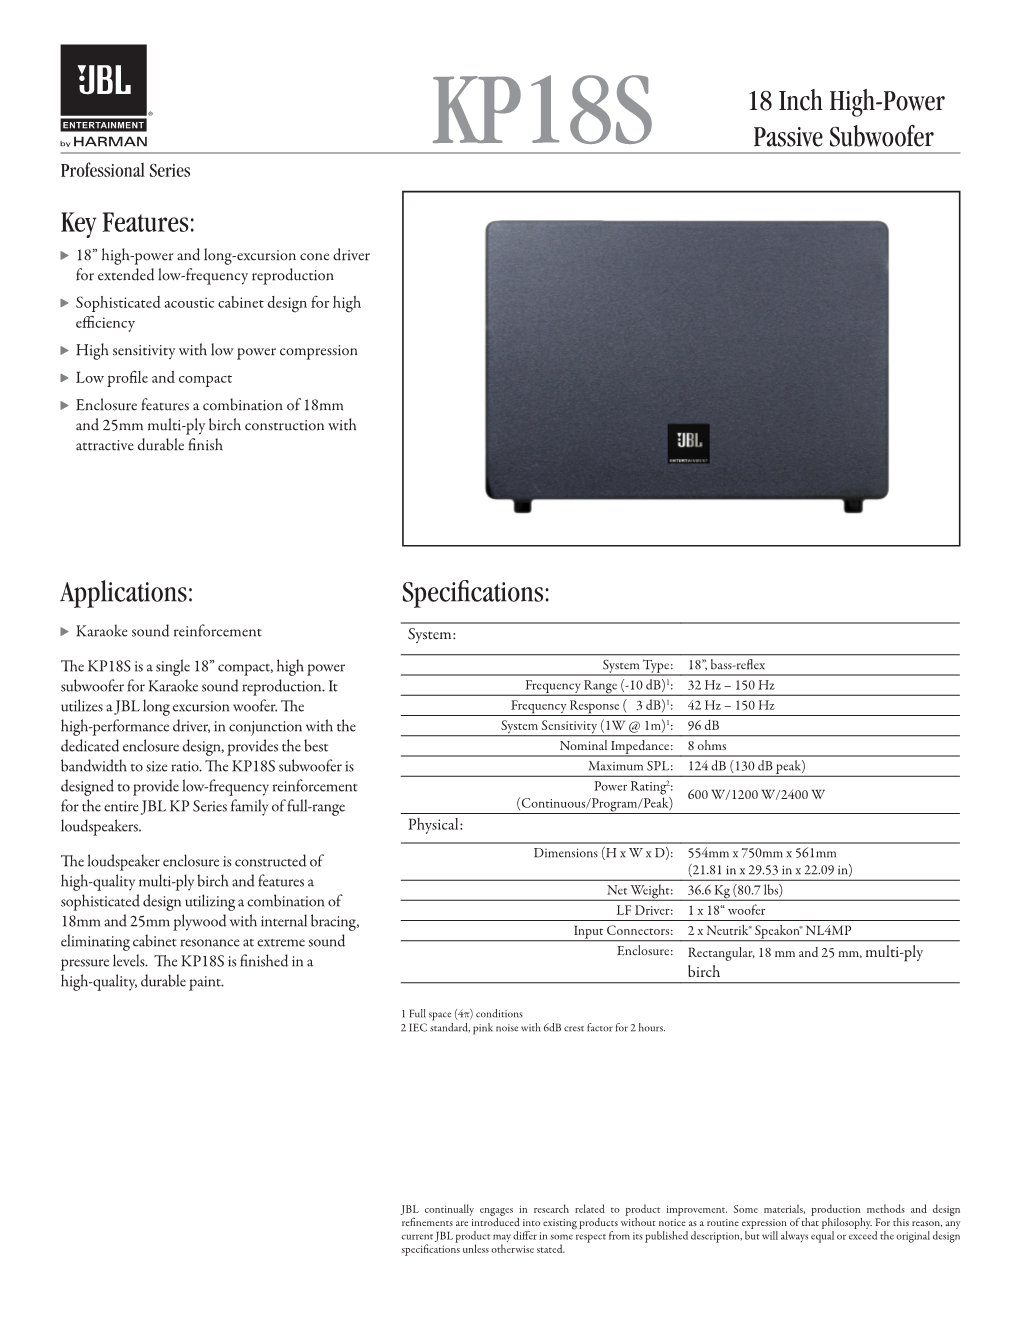 KP18S 18 Inch High-Power Passive Subwoofer Specifications